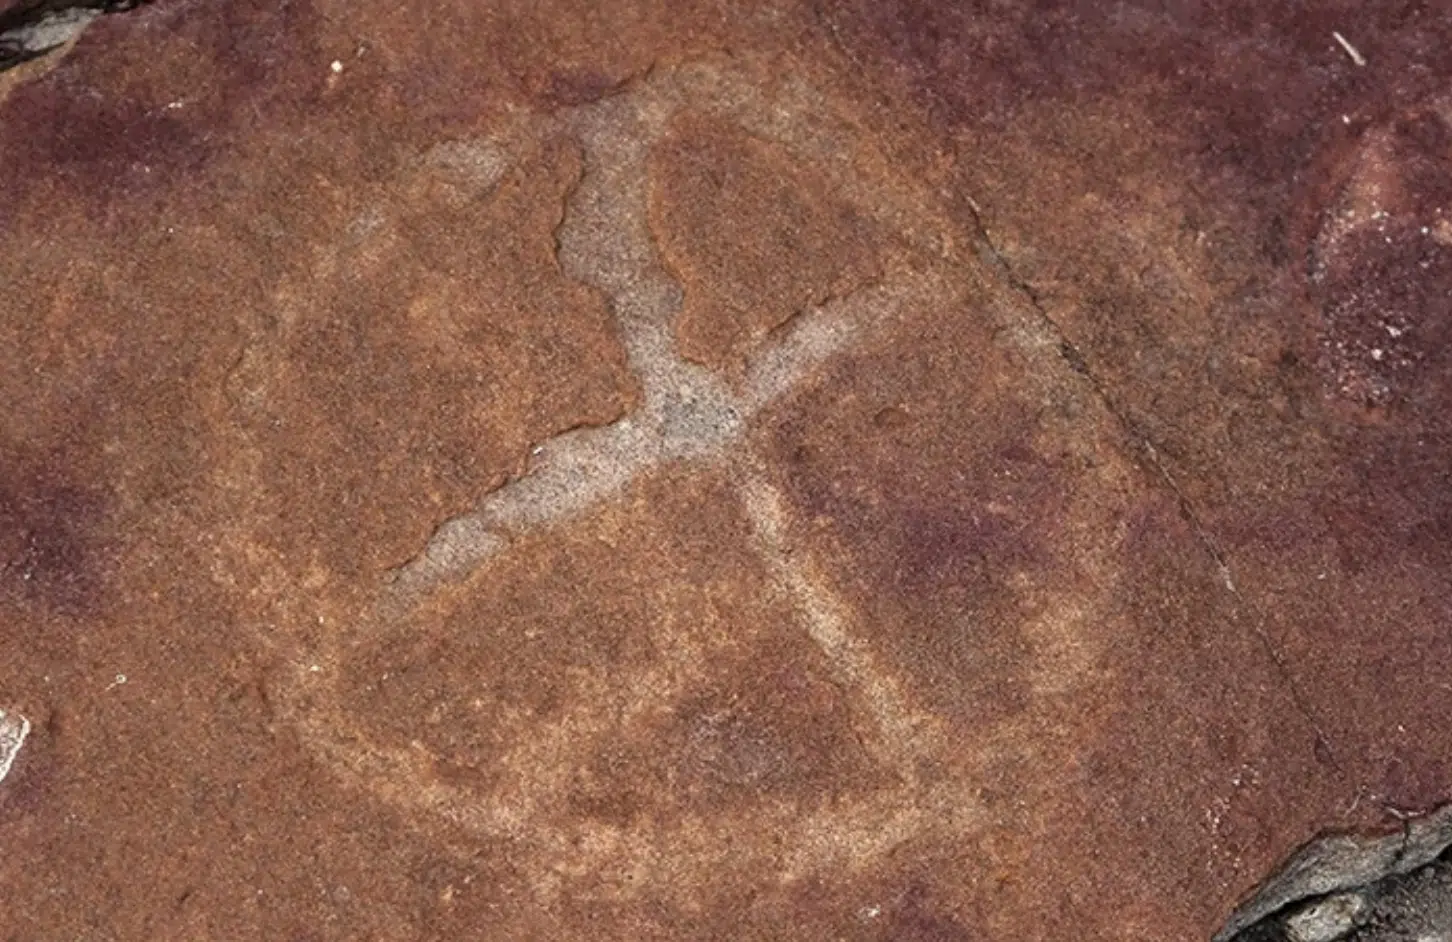 9,000-year-old rock art discovered in Brazil